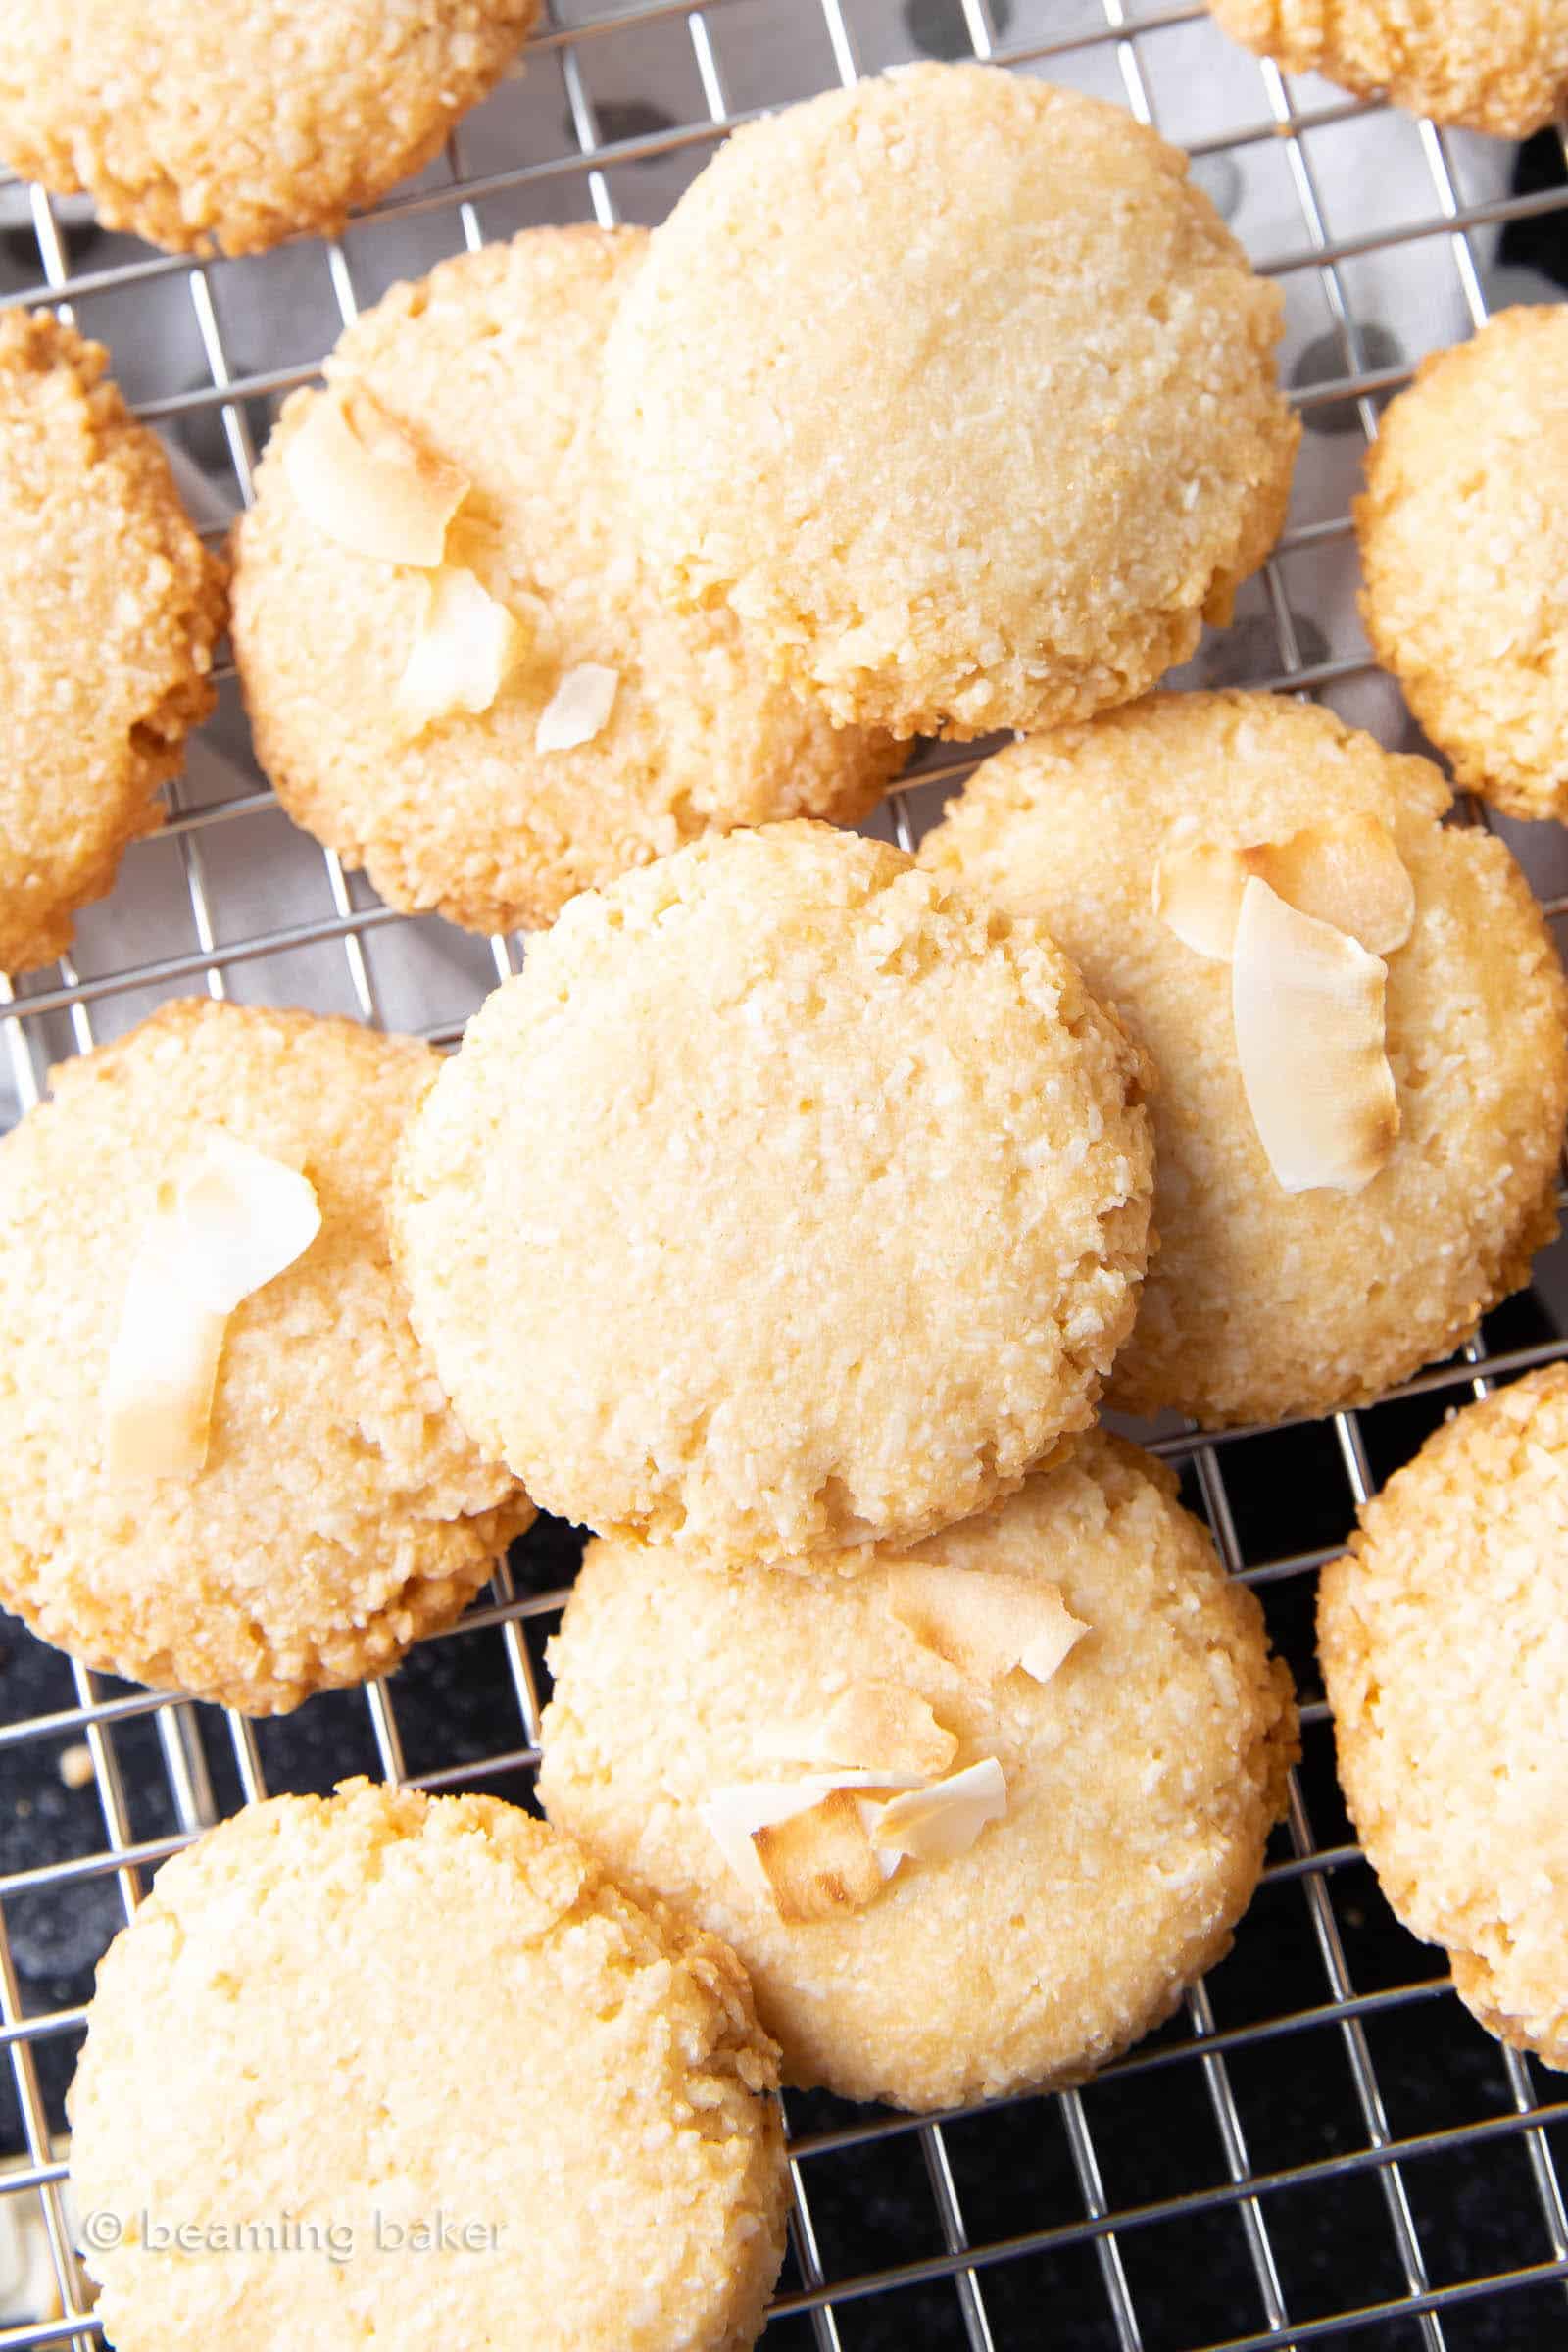 Crunchy Keto Coconut Cookies – 4 ingredient keto coconut cookies that are crunchy & crisp, with delightful coconut flavor. Easy to make, Low Carb! #Keto #KetoCookies #Coconut #LowCarb | Recipe at BeamingBaker.com